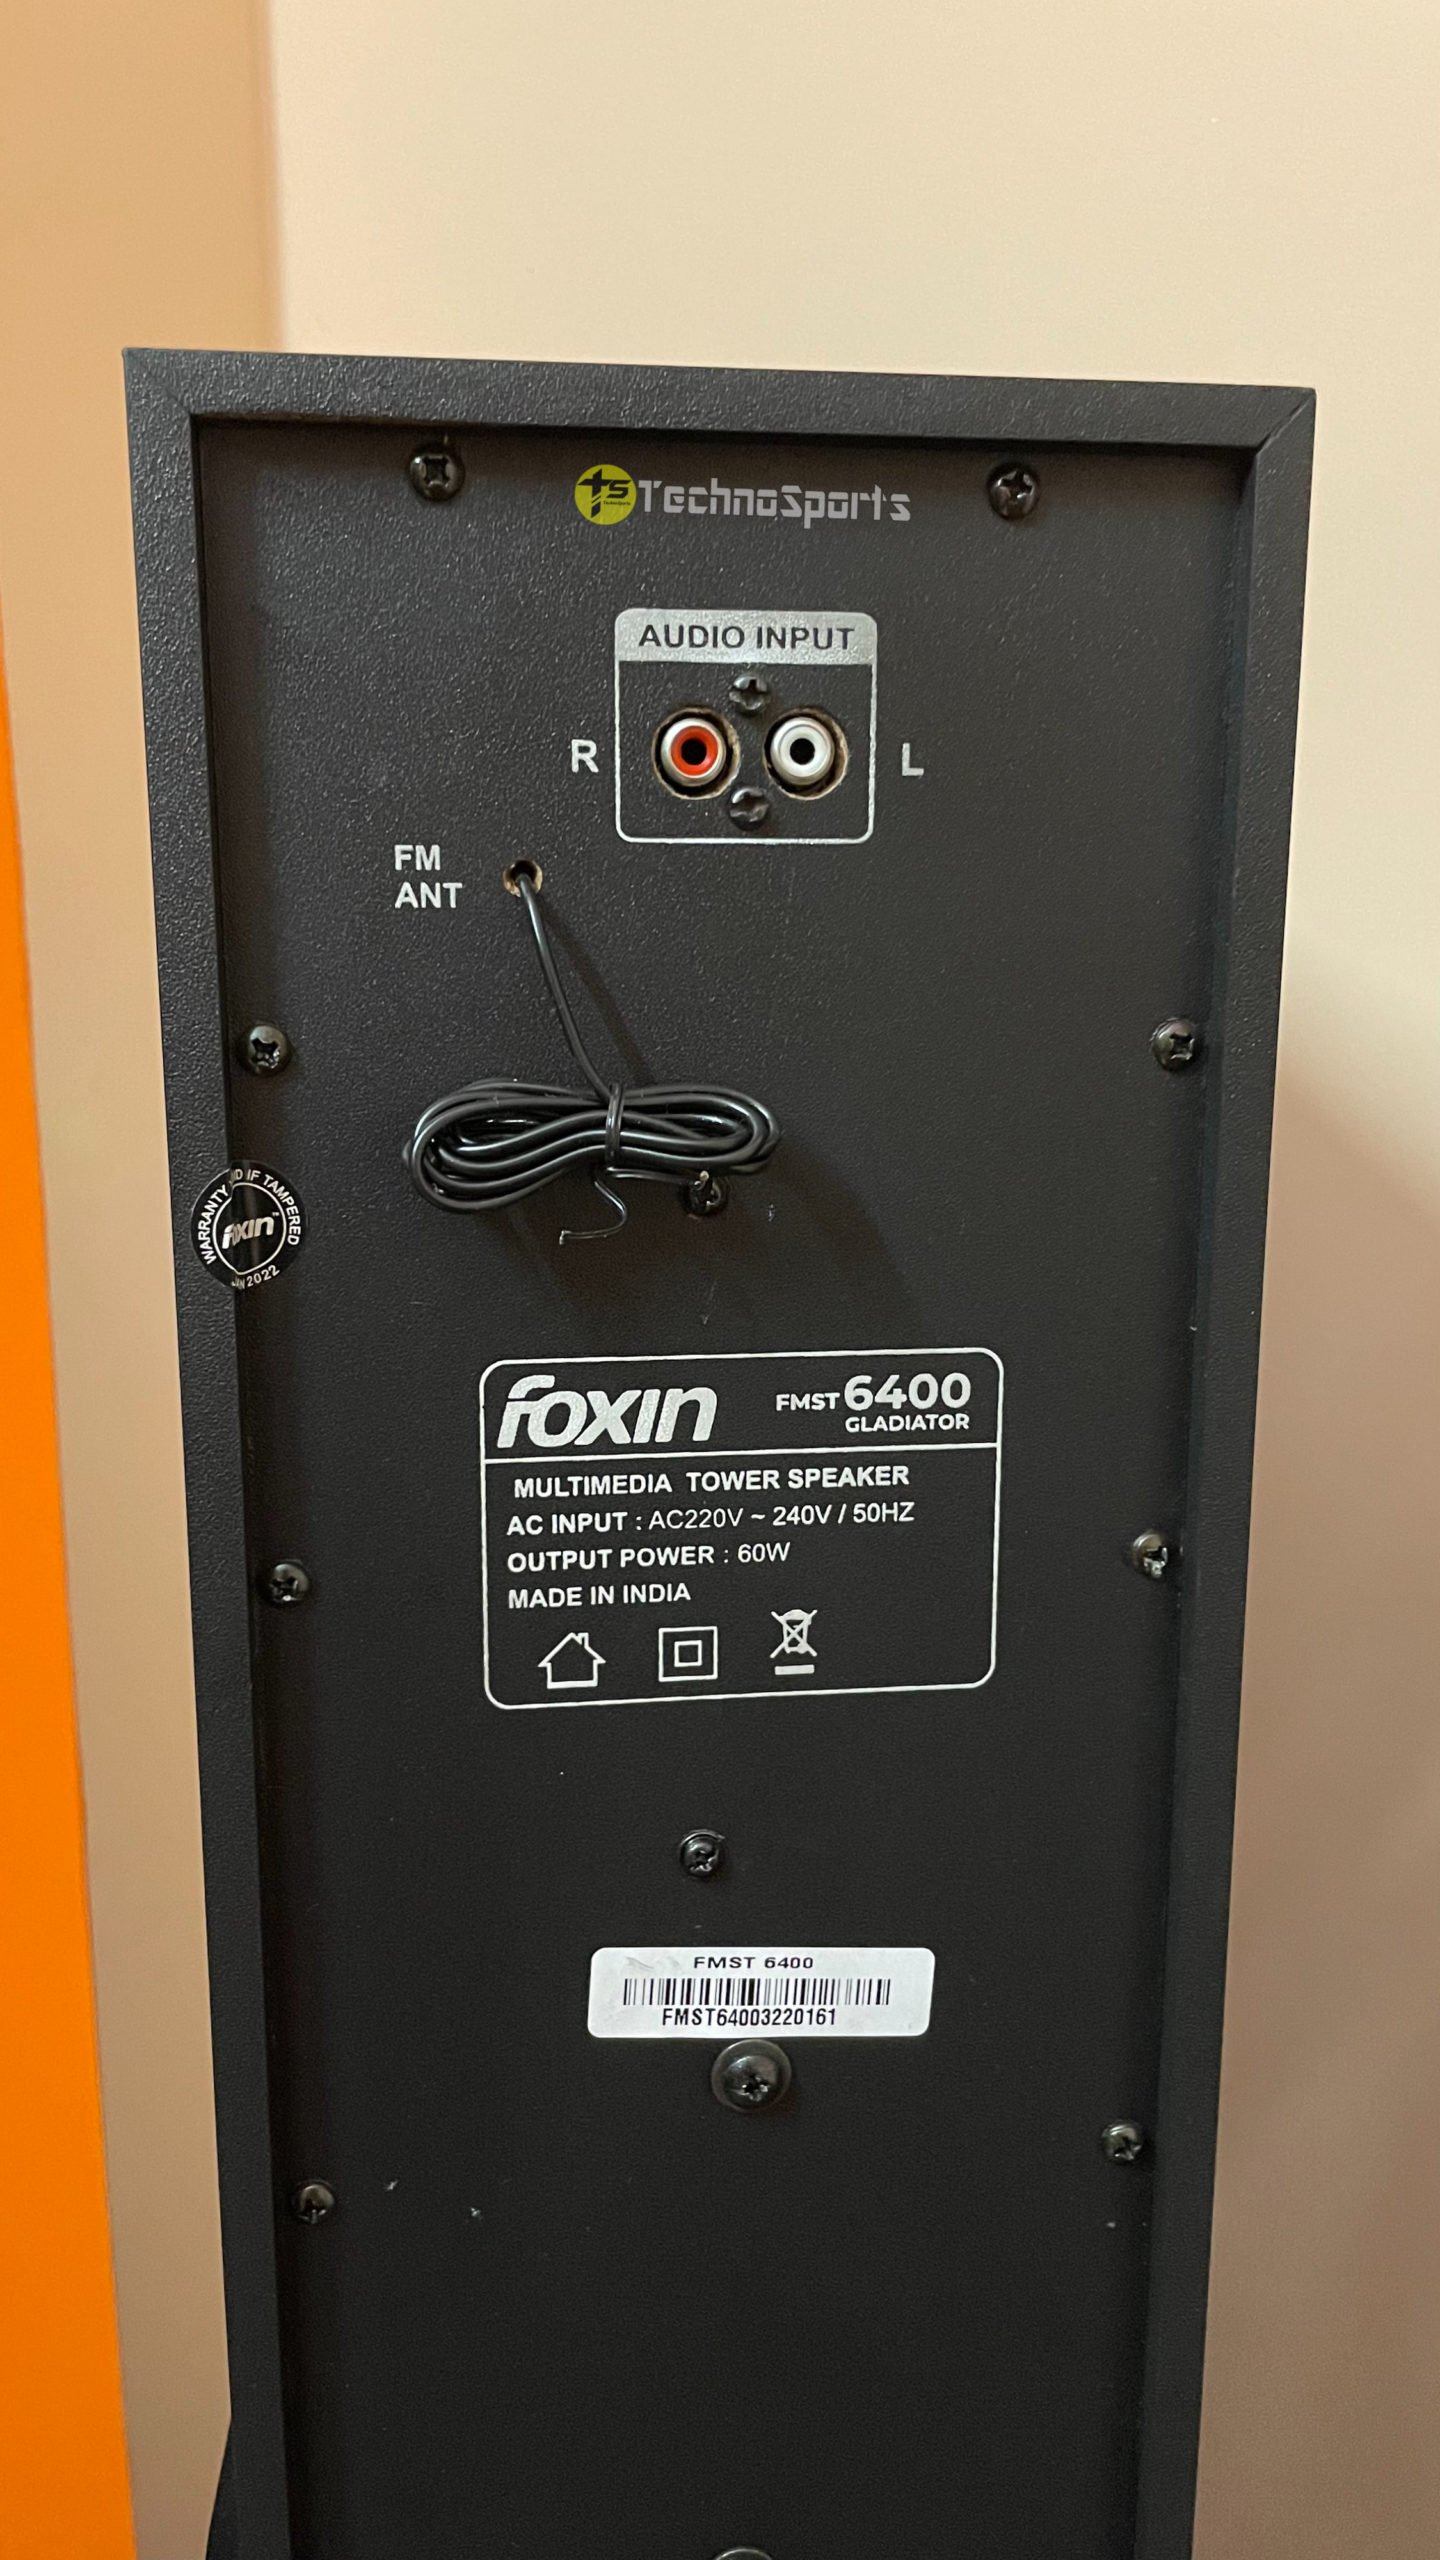 Foxin Gladiator 6400 review: Practical and Affordable